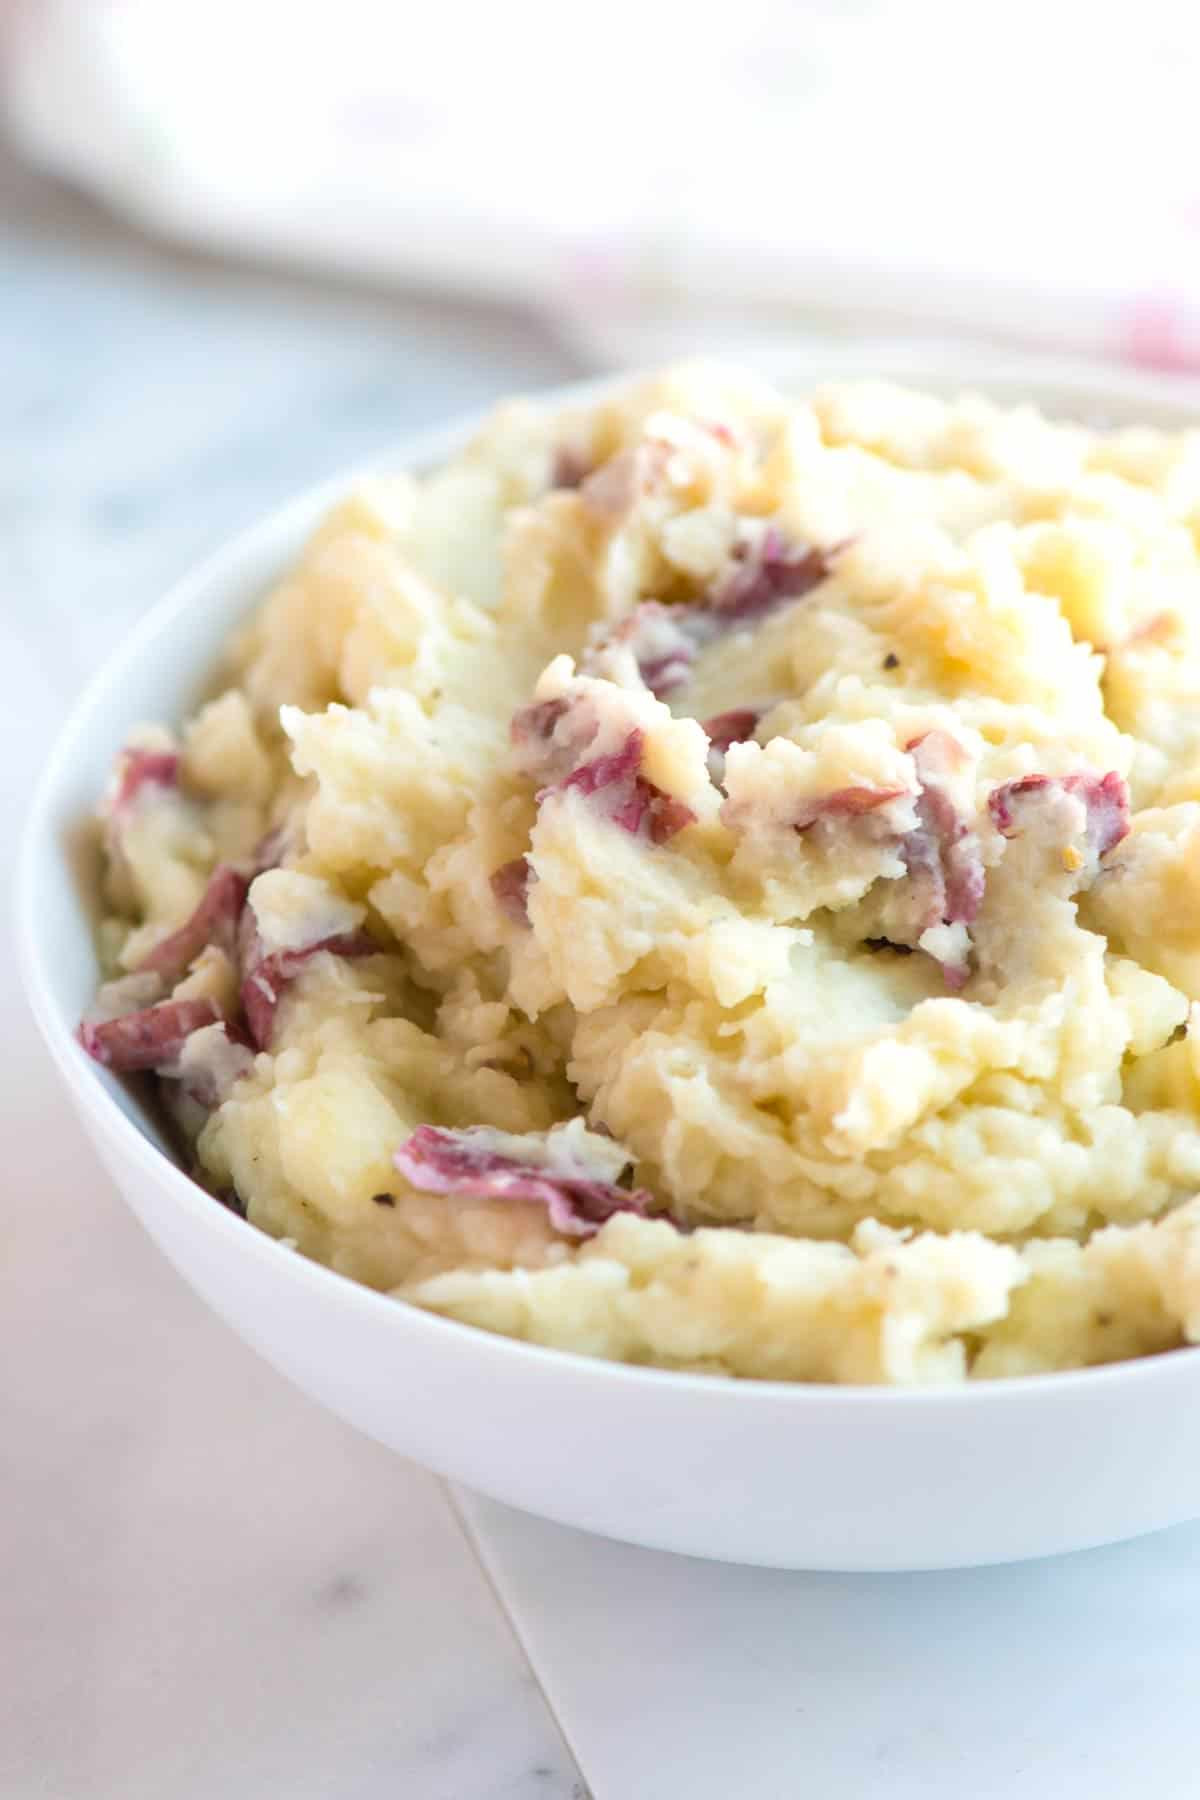 Skins On Mashed Potatoes
 Our Favorite Homemade Mashed Potatoes Recipe